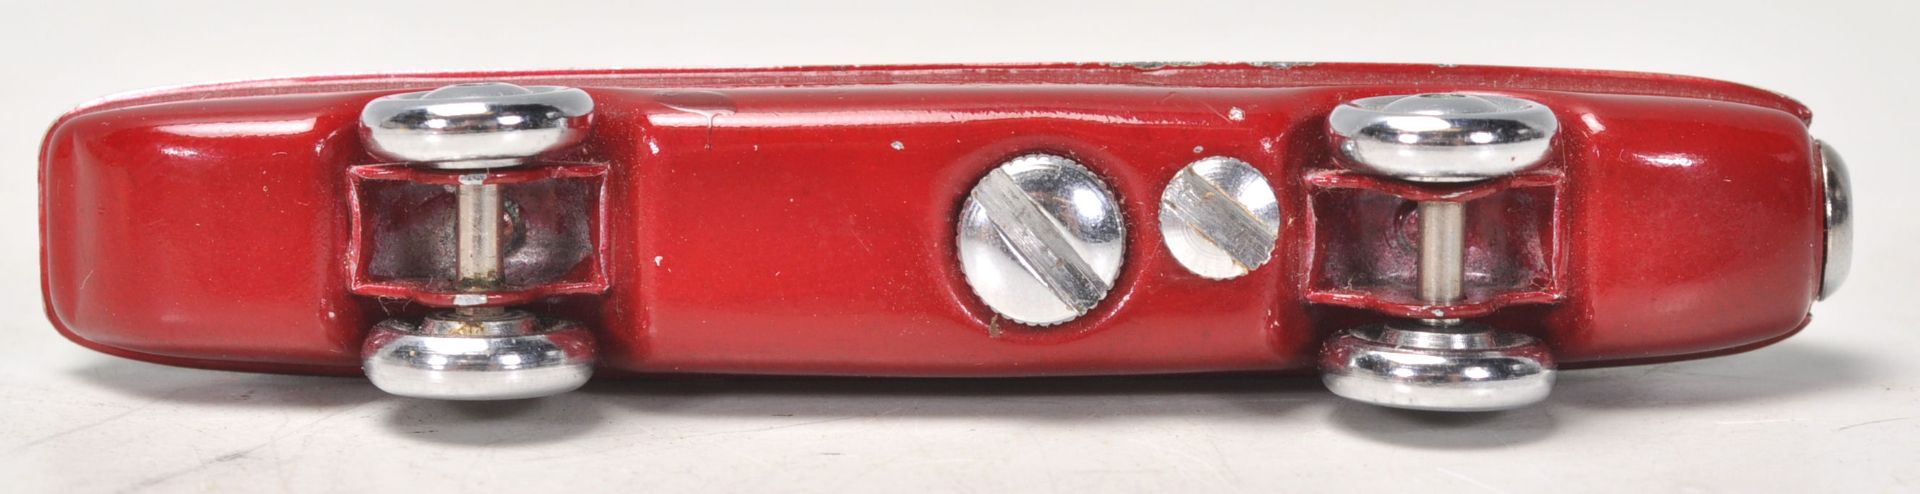 A mid 20th Century 1950's Sarome Bluebird novelty cigarette lighter, finished in red and grey with - Image 7 of 7